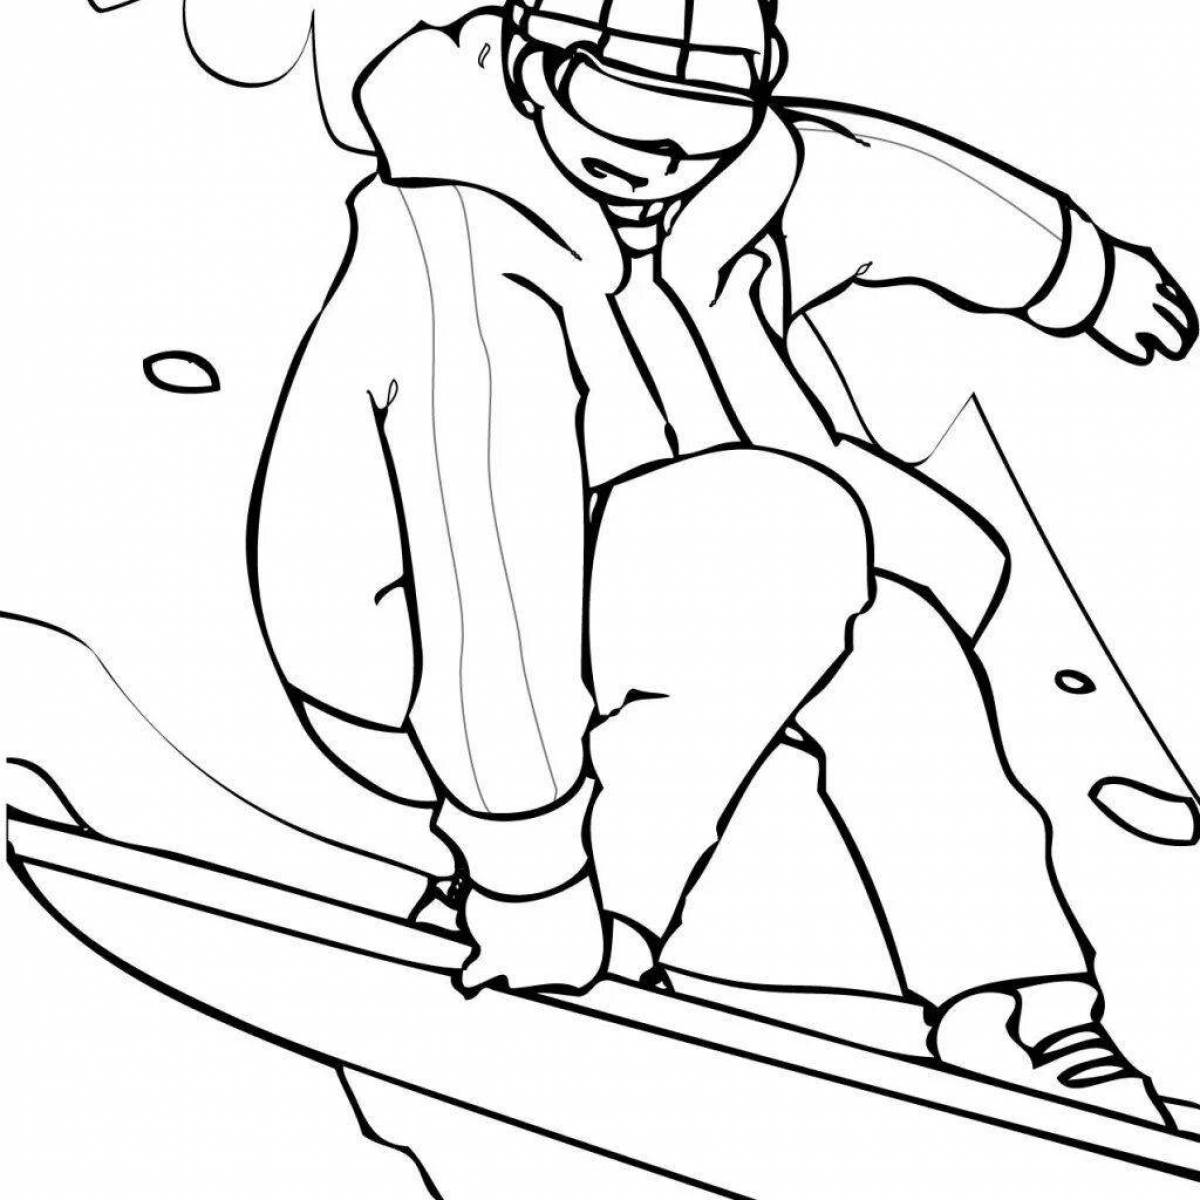 Bright snowboard coloring page